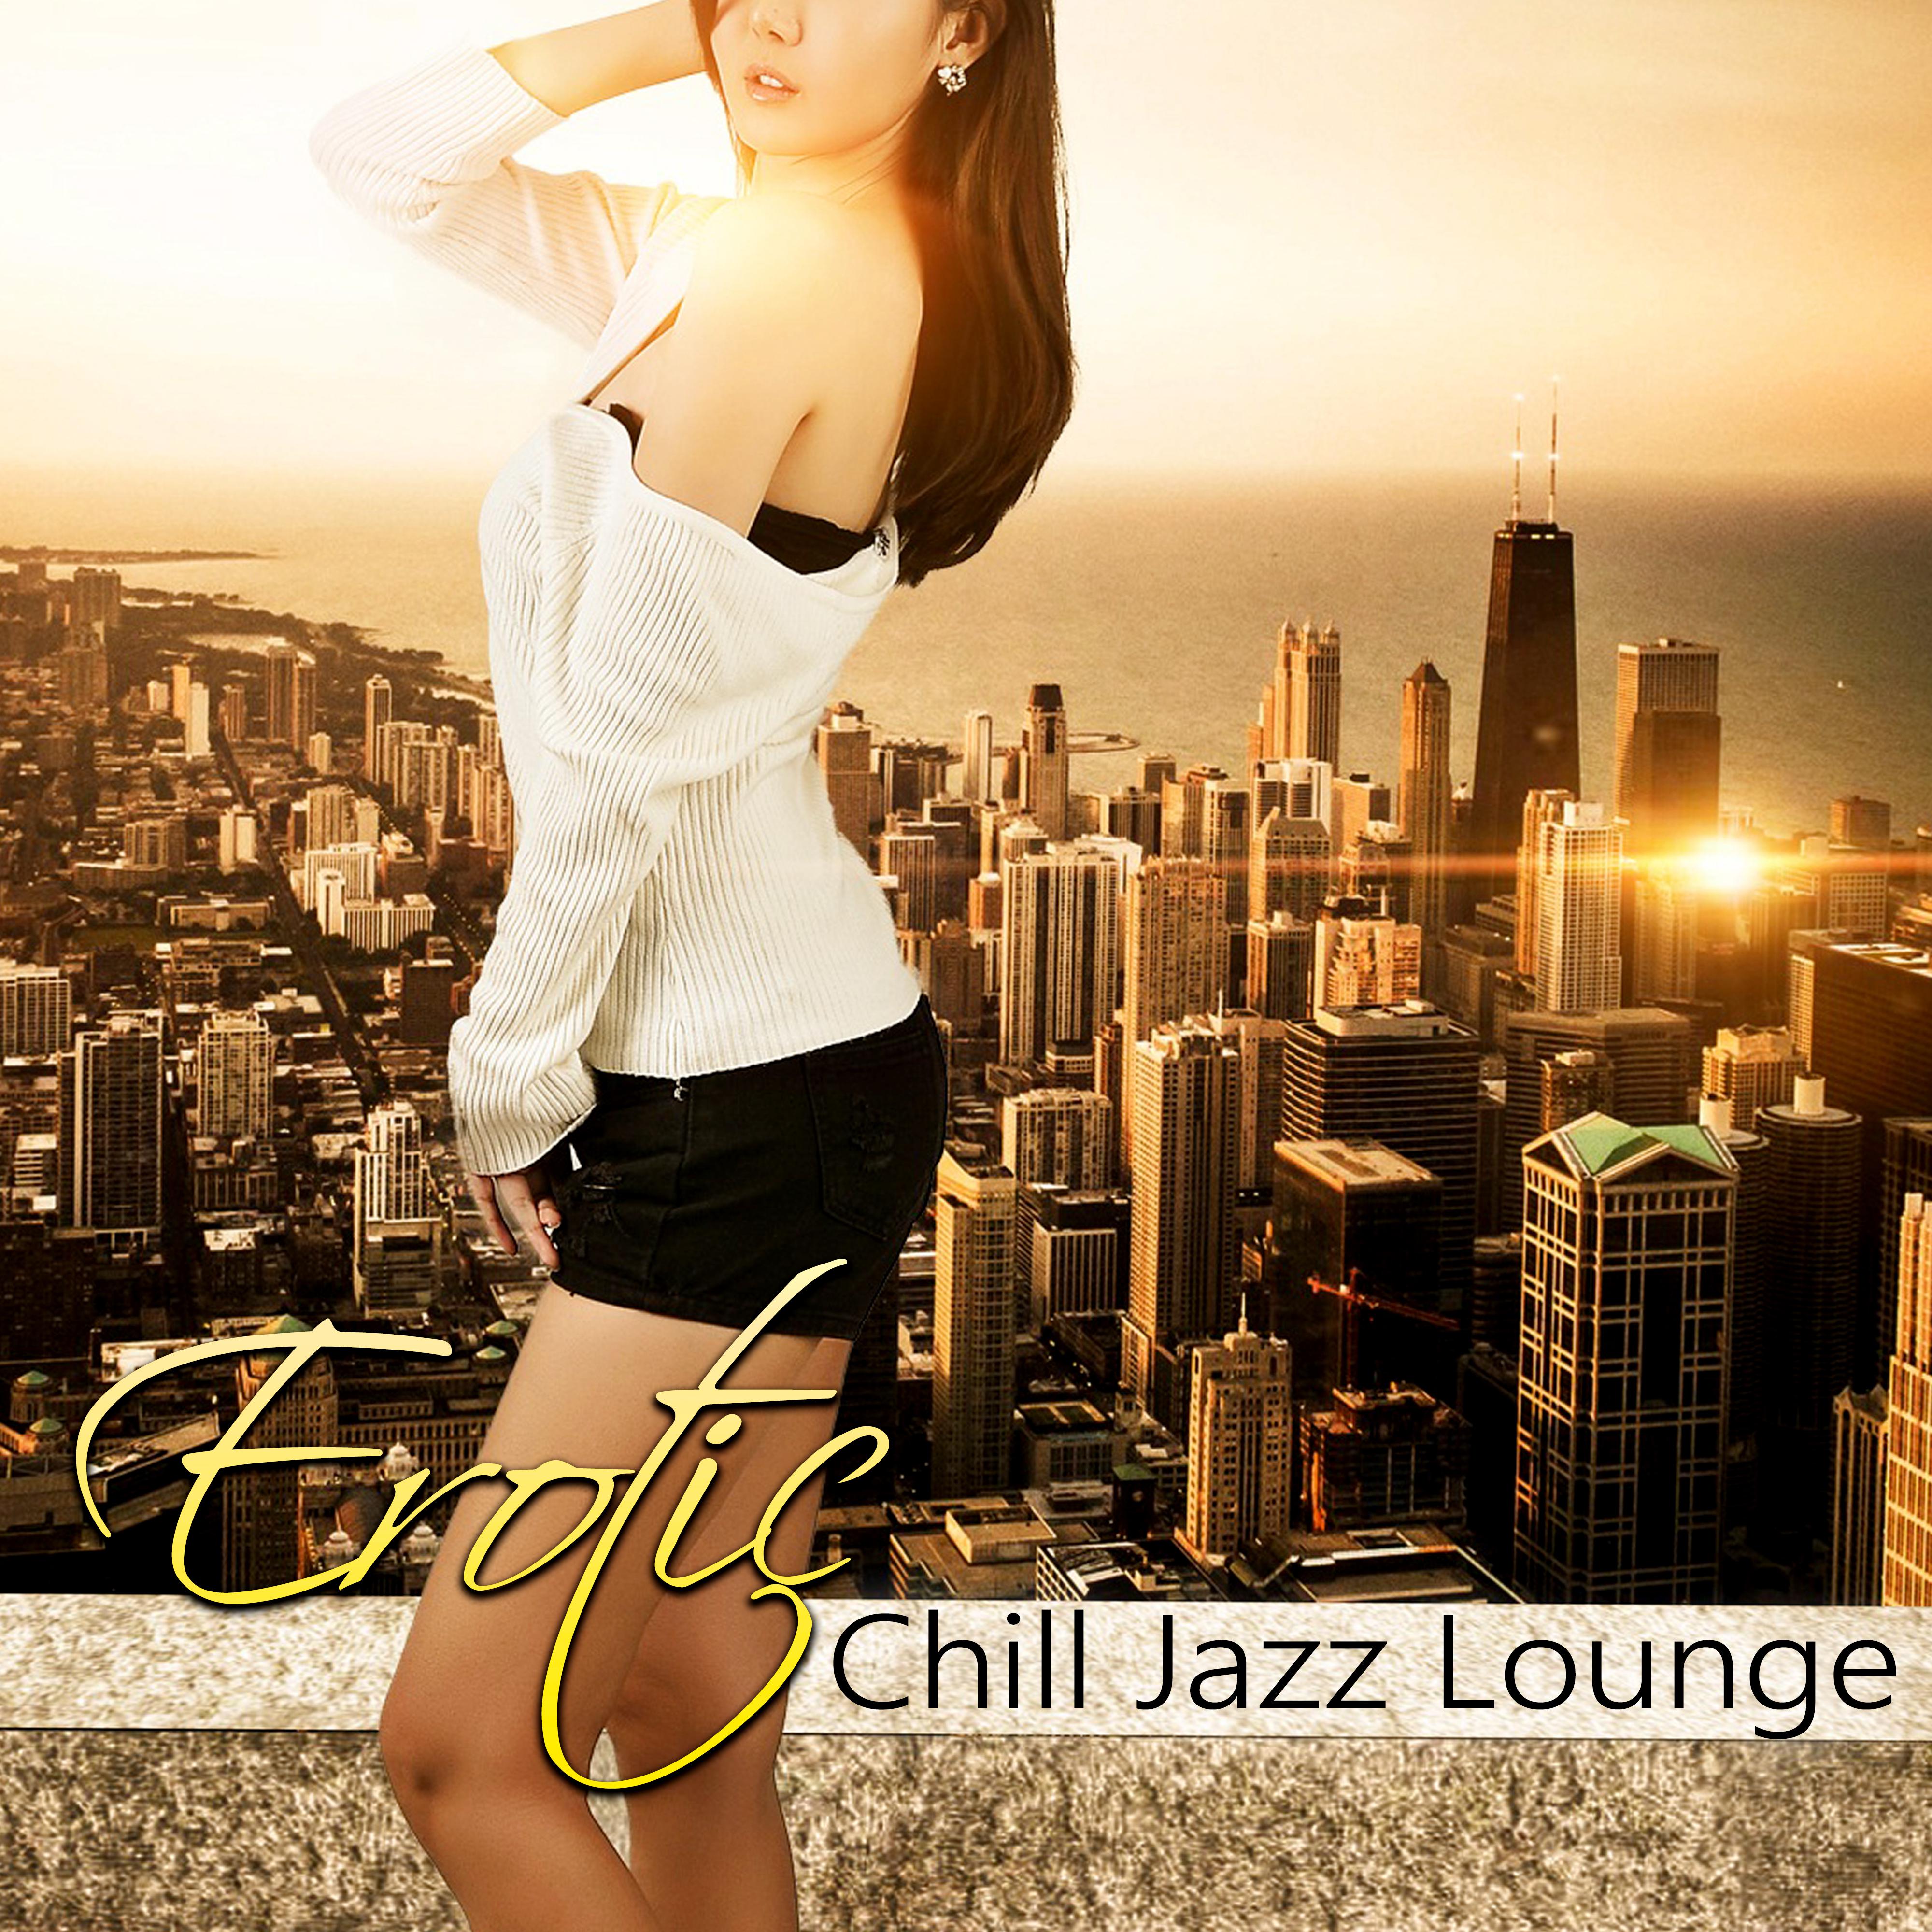 Erotic Chill Jazz Lounge  Smooth Jazz Music,  Songs, Erotic Moments, Cocktail  Drink Bar, Piano Background for Intimacy, Romantic Night, Making Love, Piano Bar